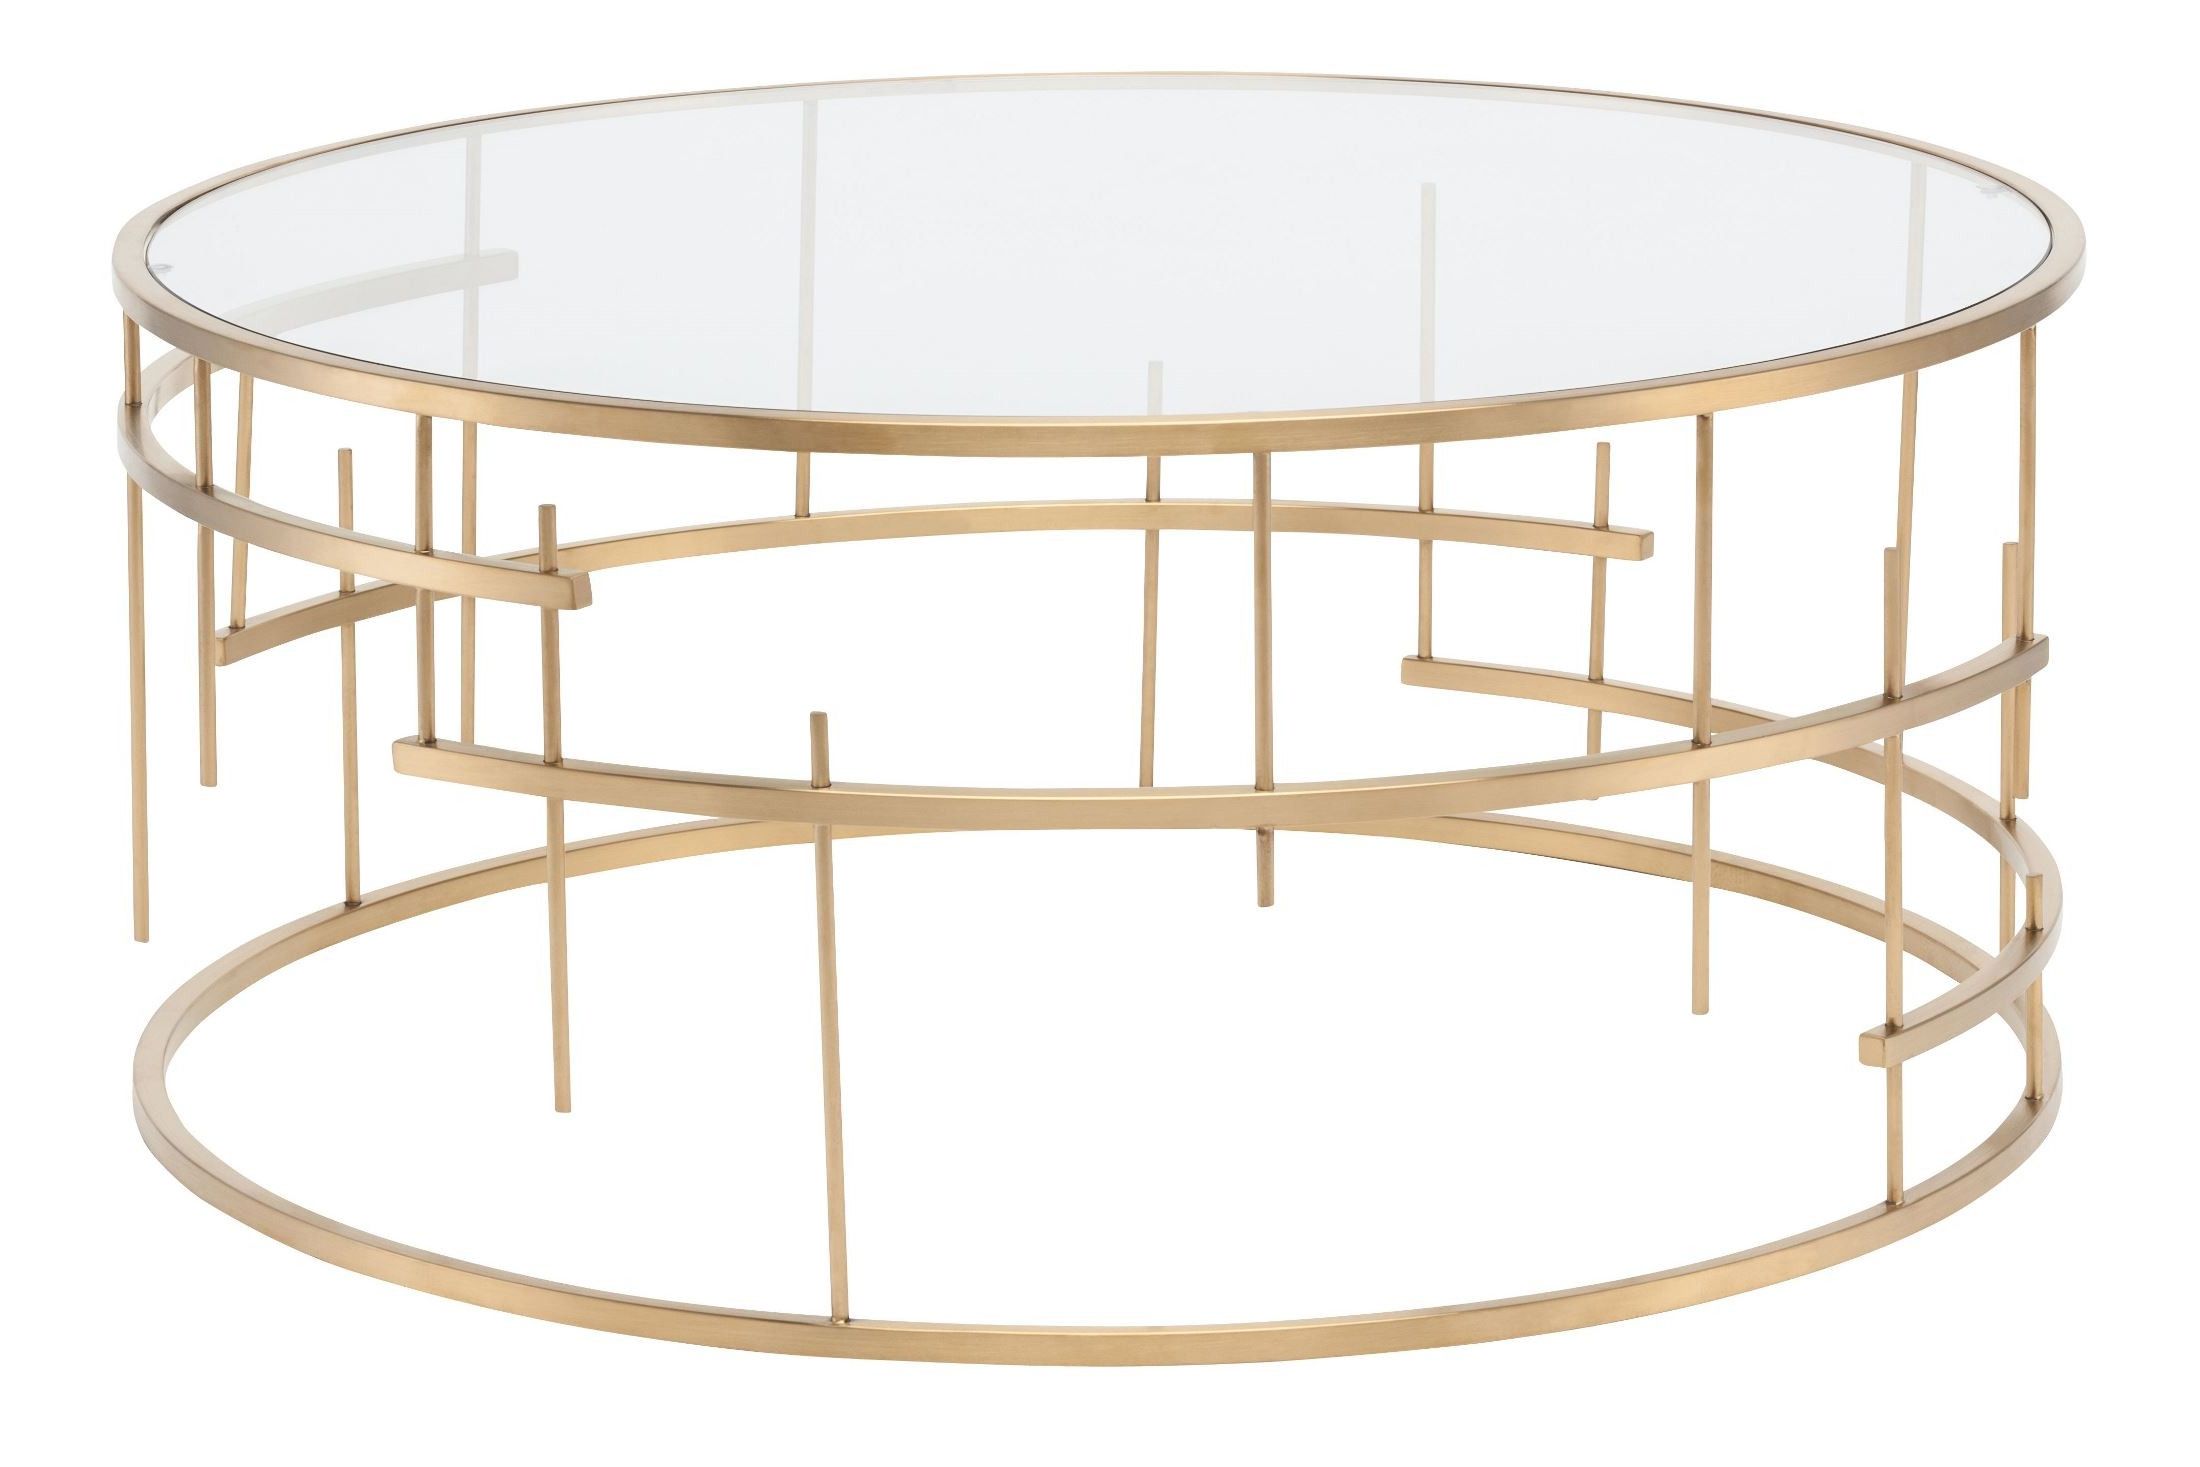 Tiffany Brushed Gold Stainless Coffee Table From Nuevo Inside 2019 Square Black And Brushed Gold Coffee Tables (View 10 of 20)